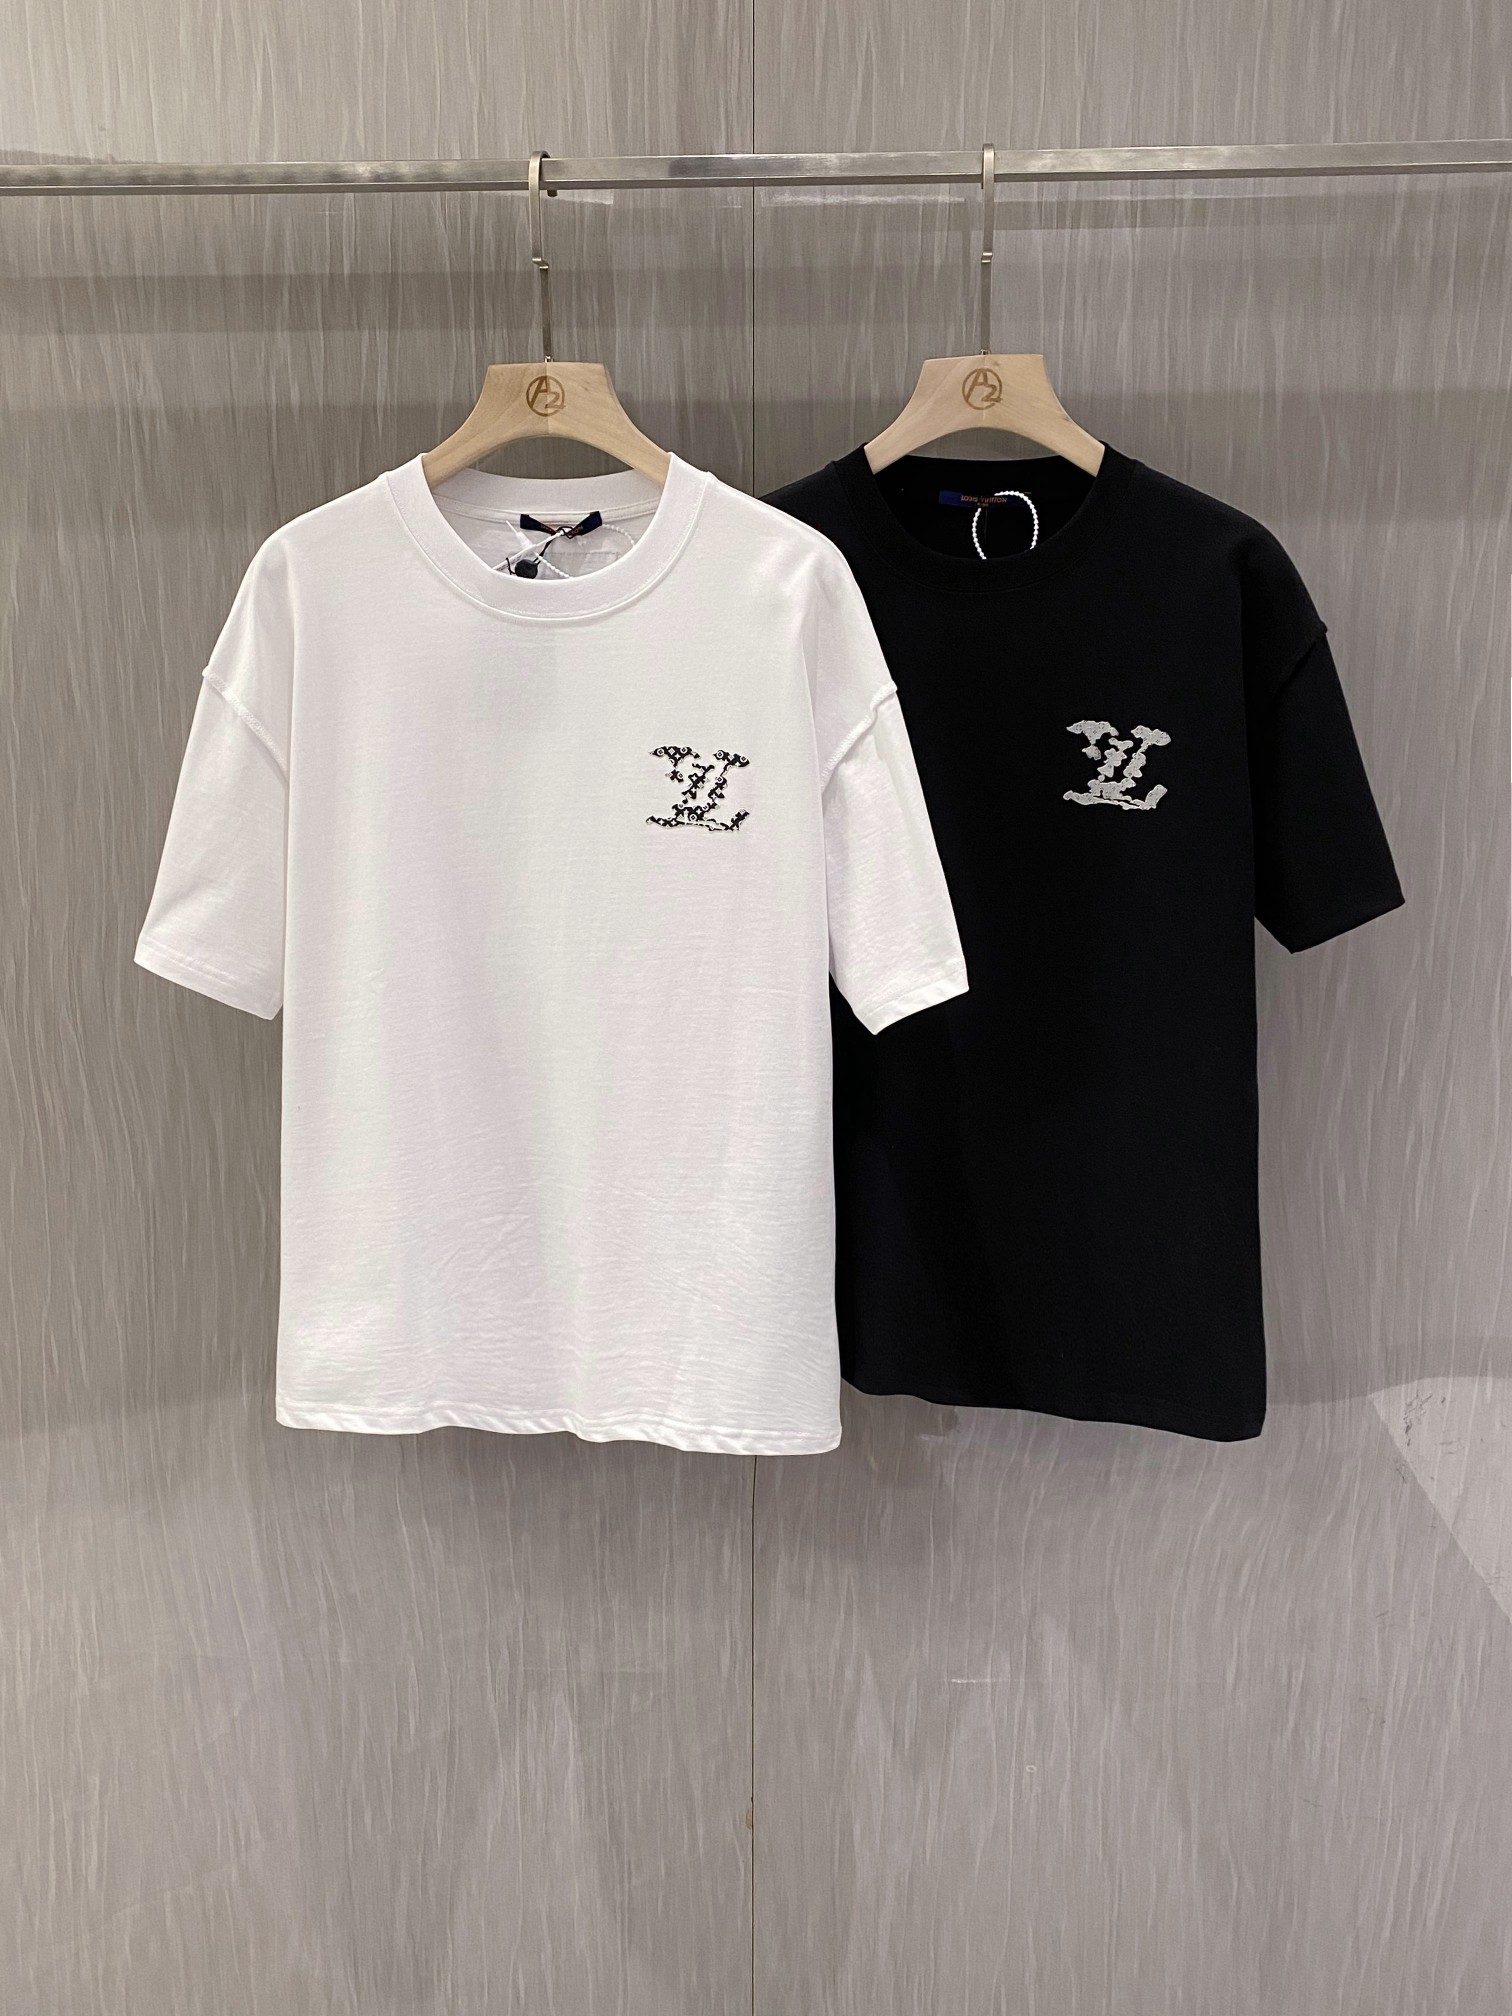 Louis Vuitton Clothing T-Shirt White Printing Combed Cotton Spring Collection Fashion Short Sleeve